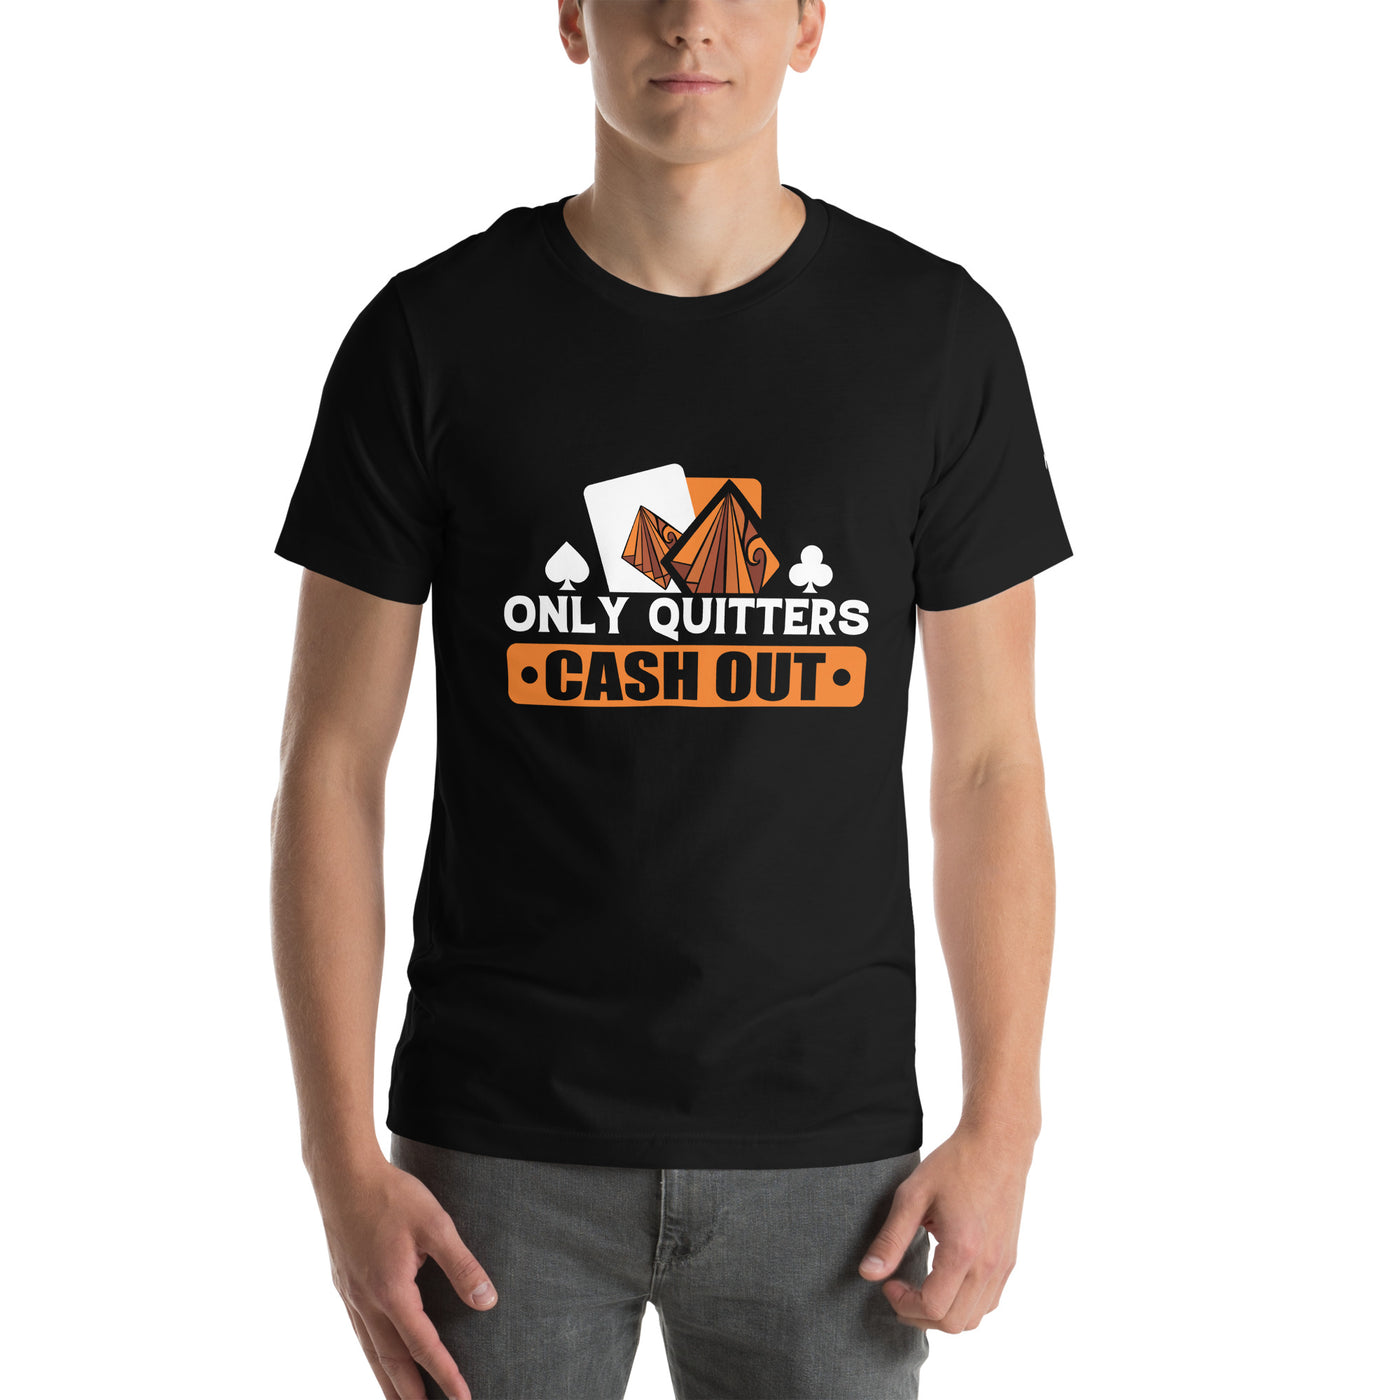 Only Quitters Cash Out - Unisex t-shirt